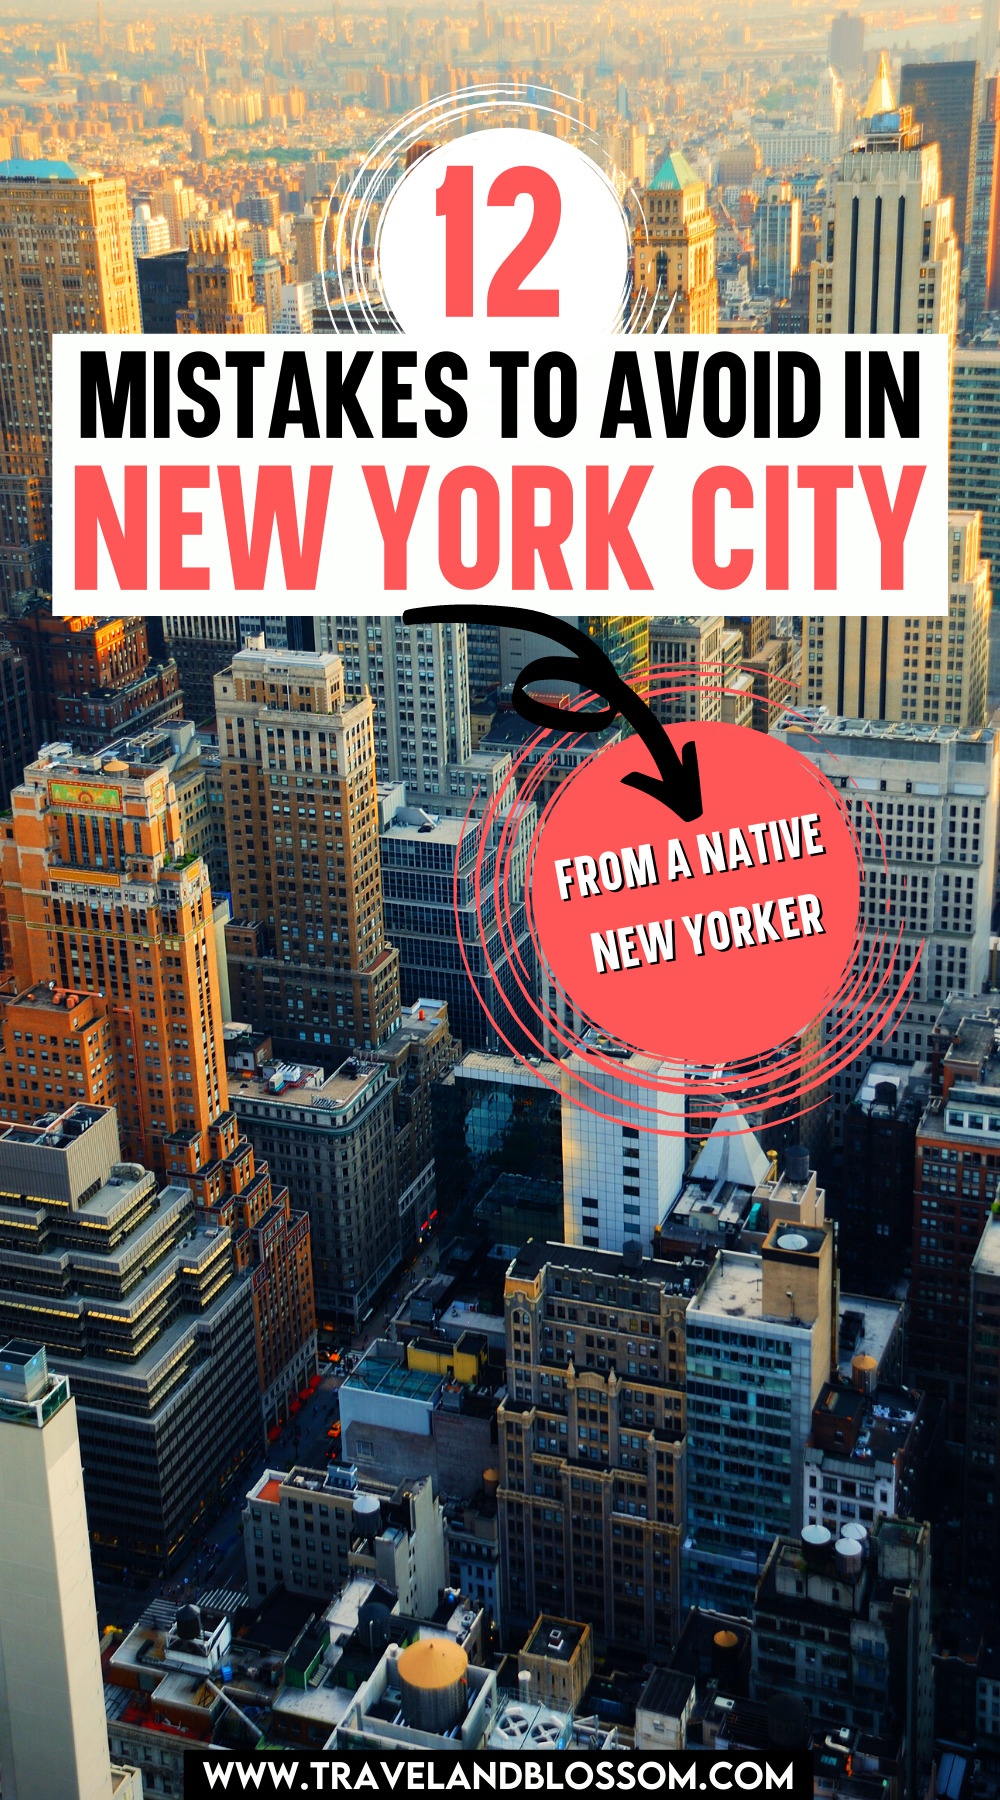 12 Common Mistakes to Avoid in NYC